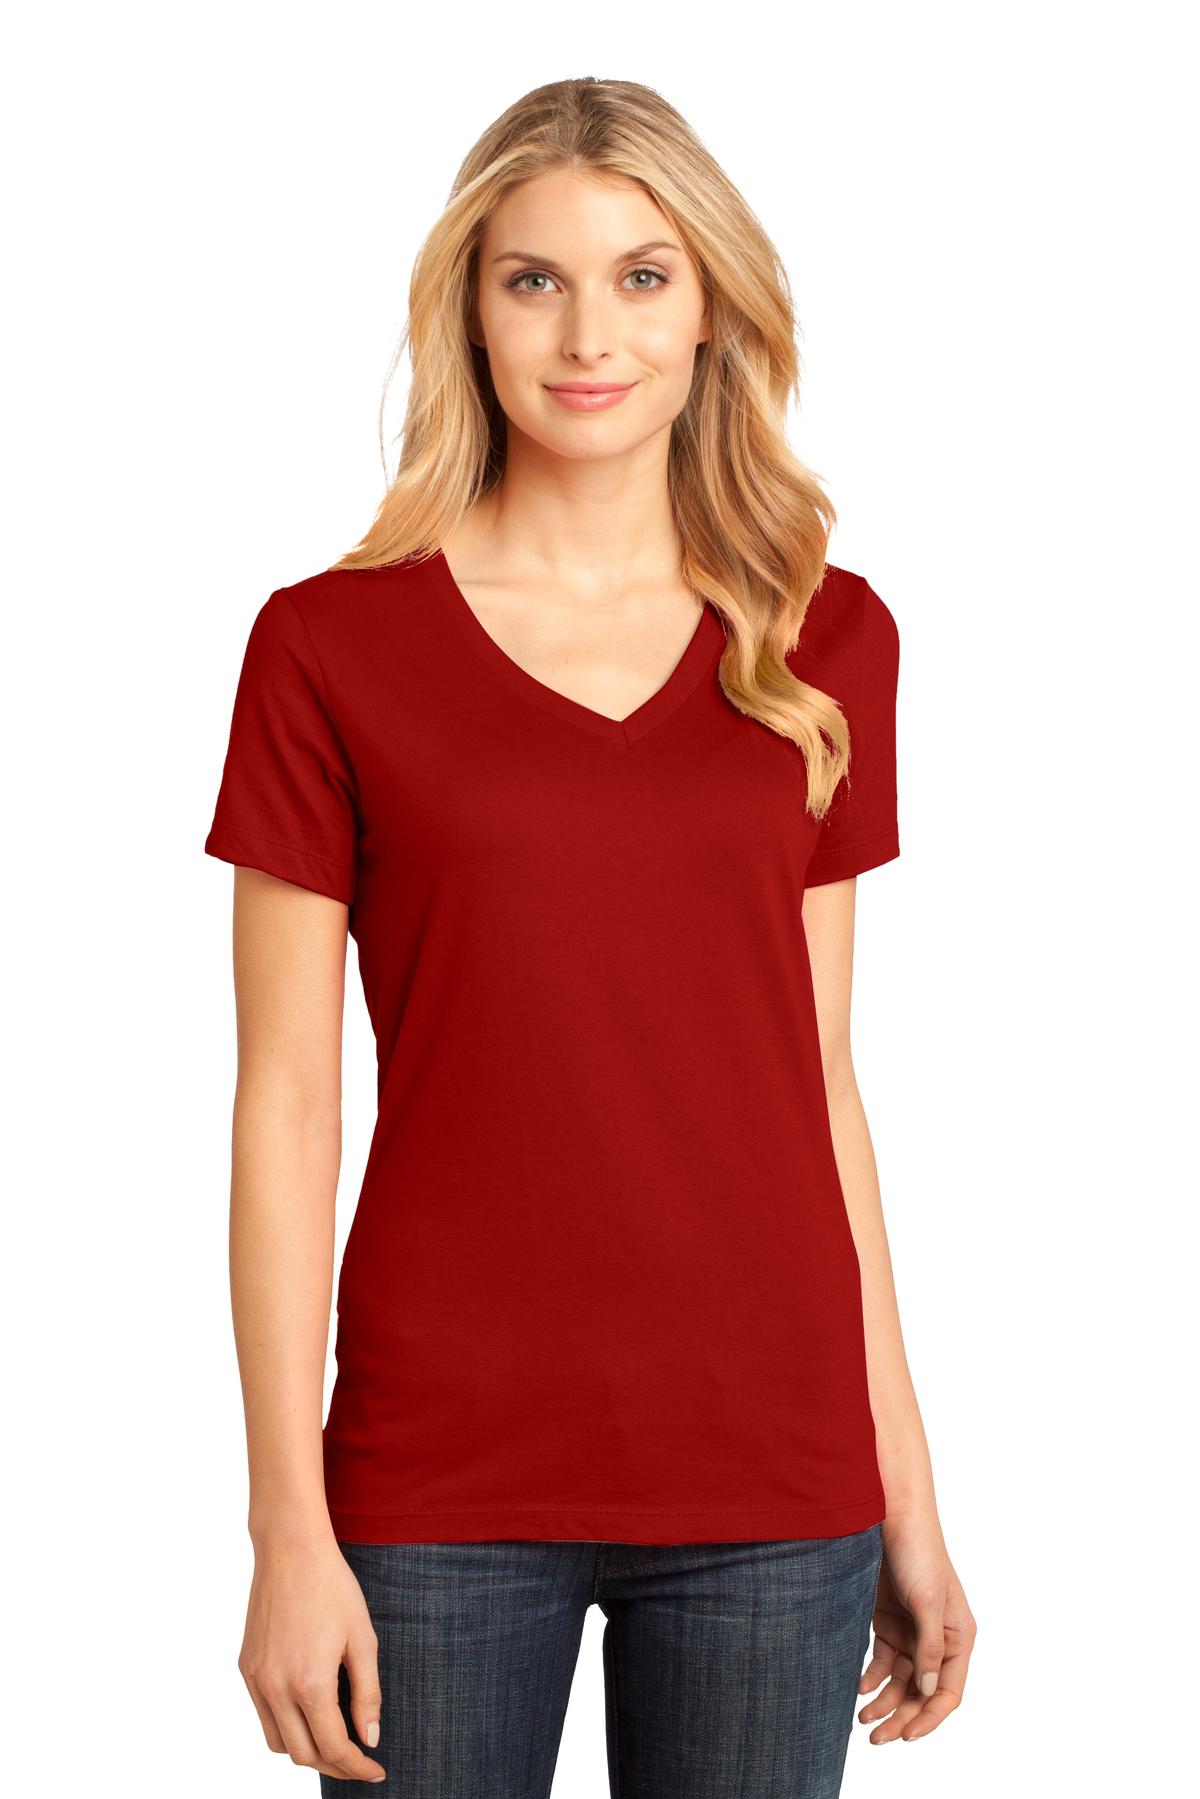 District - Women's Perfect Weight V-Neck Tee DM1170L